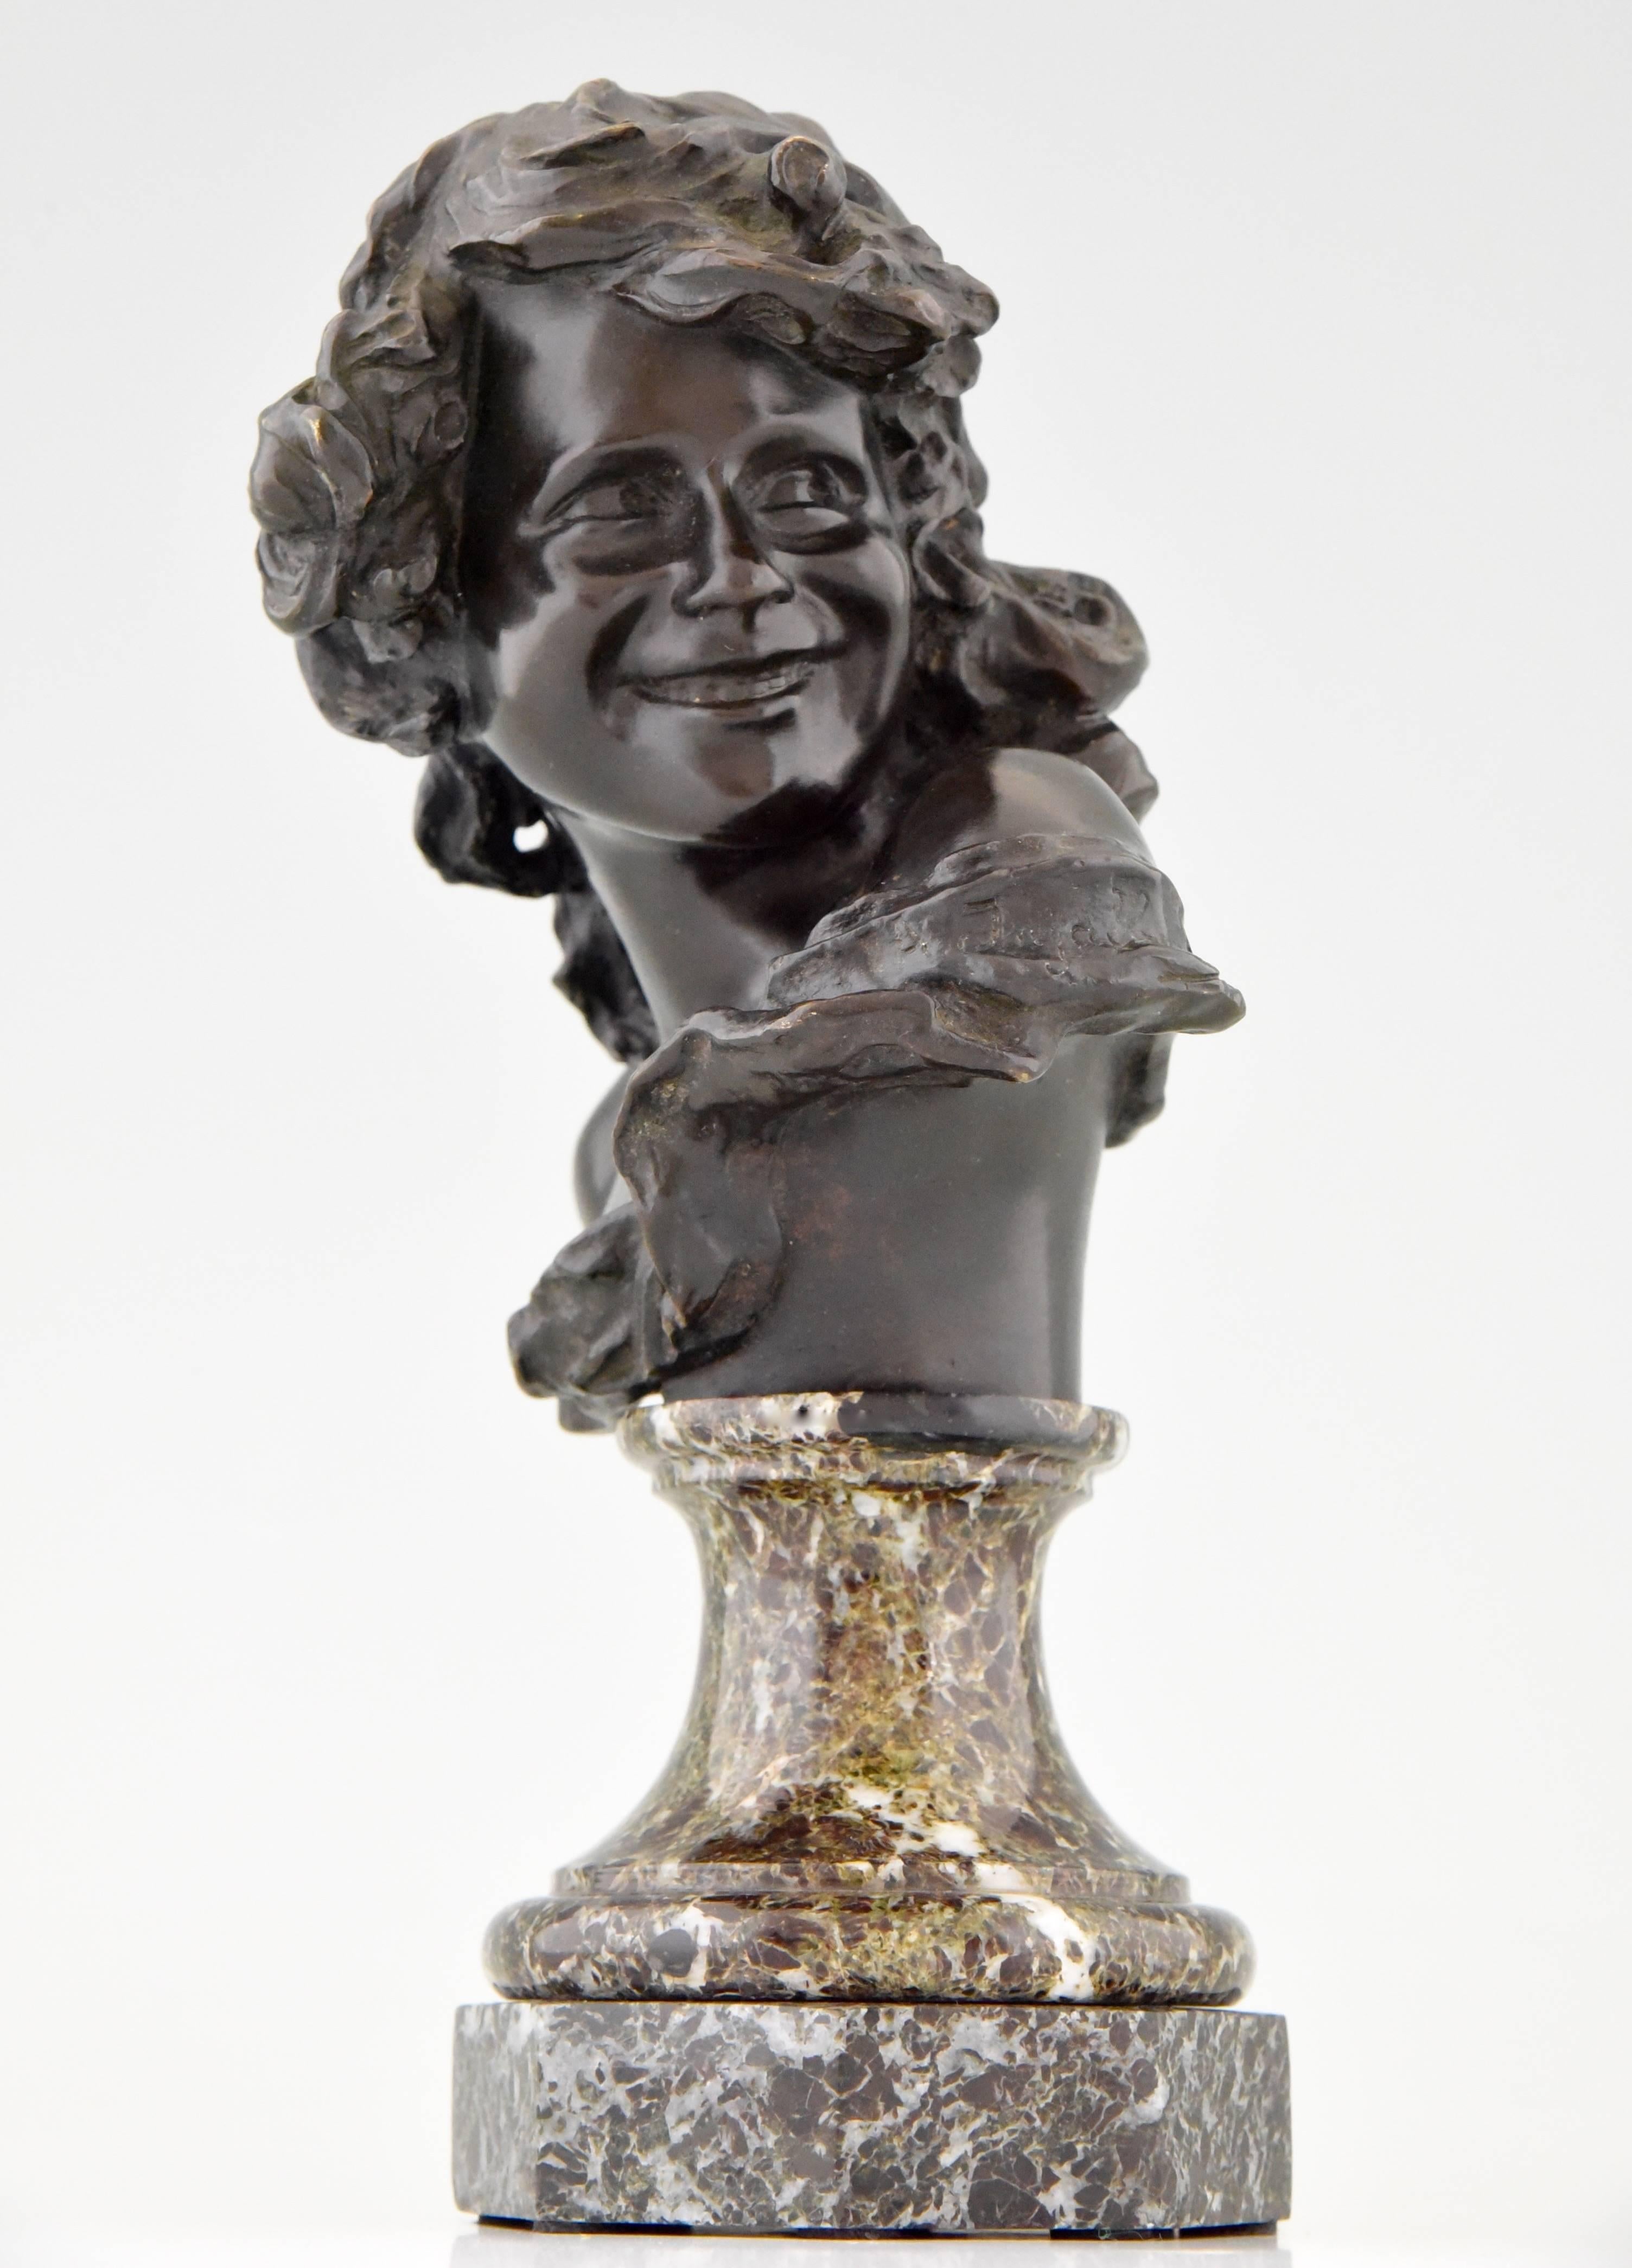 Art Nouveau French Antique Bronze Bust of a Smiling Child by Injalbert, 1900